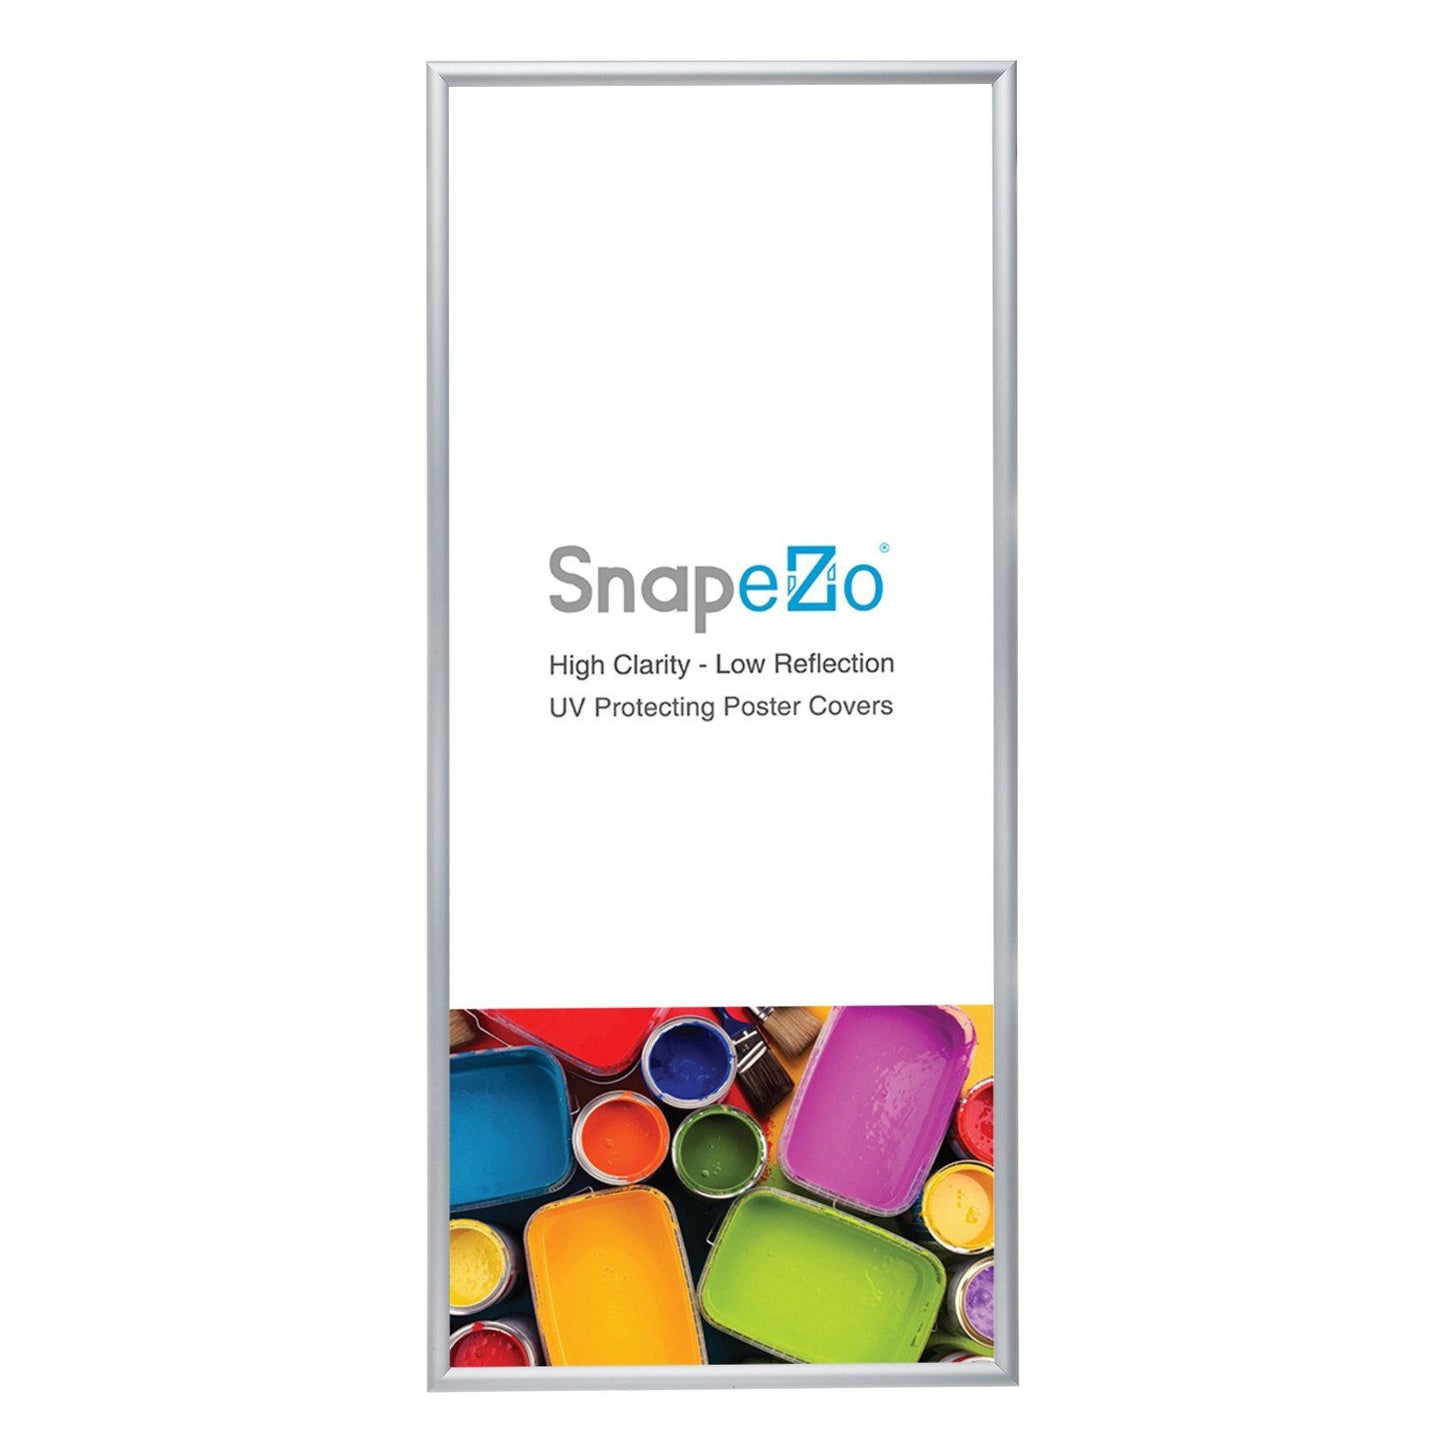 Load image into Gallery viewer, 10x24 Silver SnapeZo® Snap Frame - 1.2 Inch Profile
